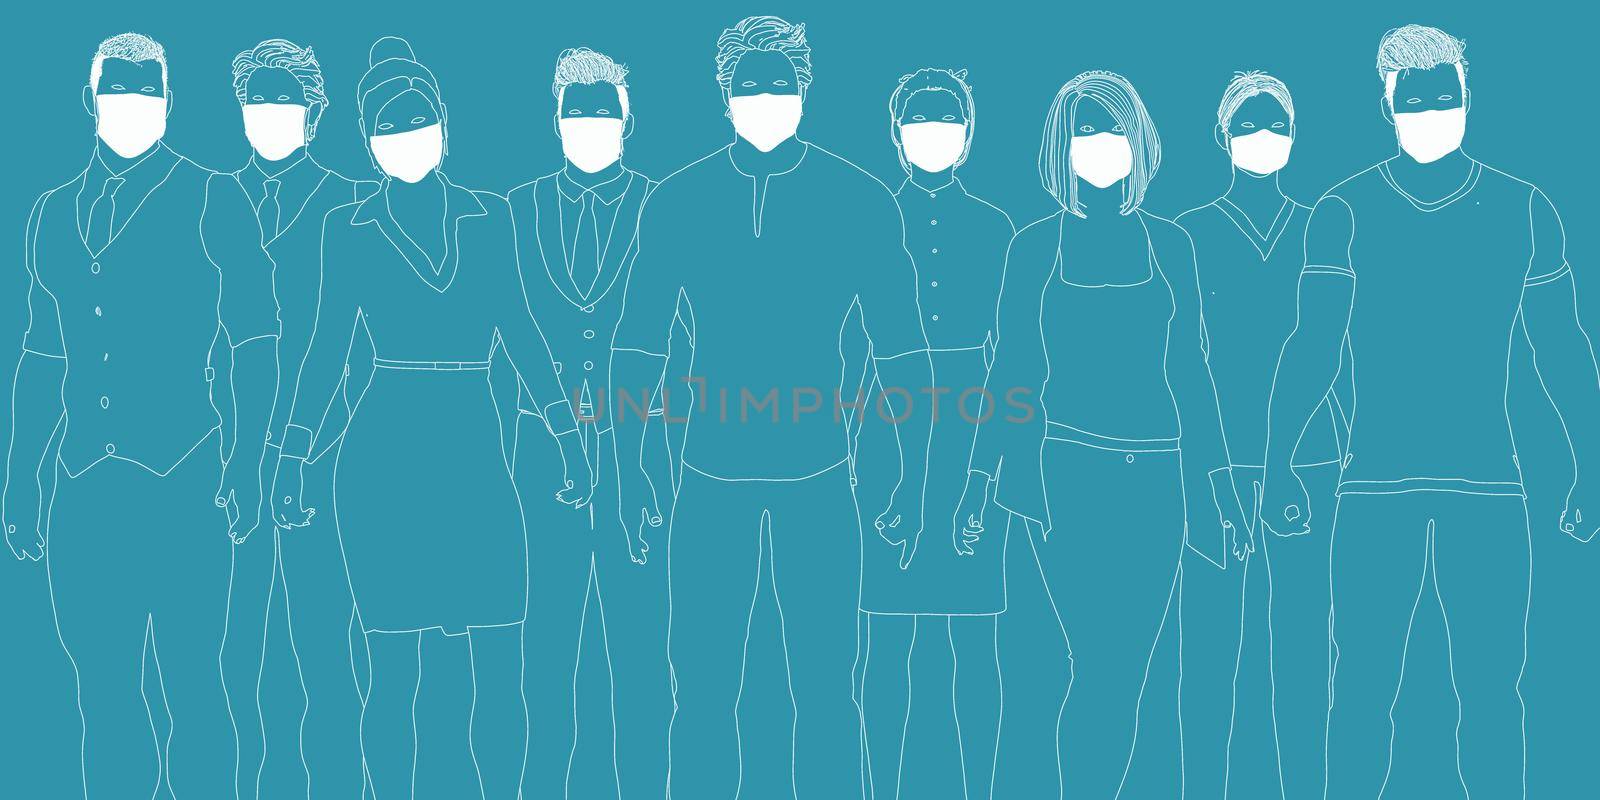 Group of People Wearing Surgical Masks Standing Together Prevention and Safety Procedures Concept